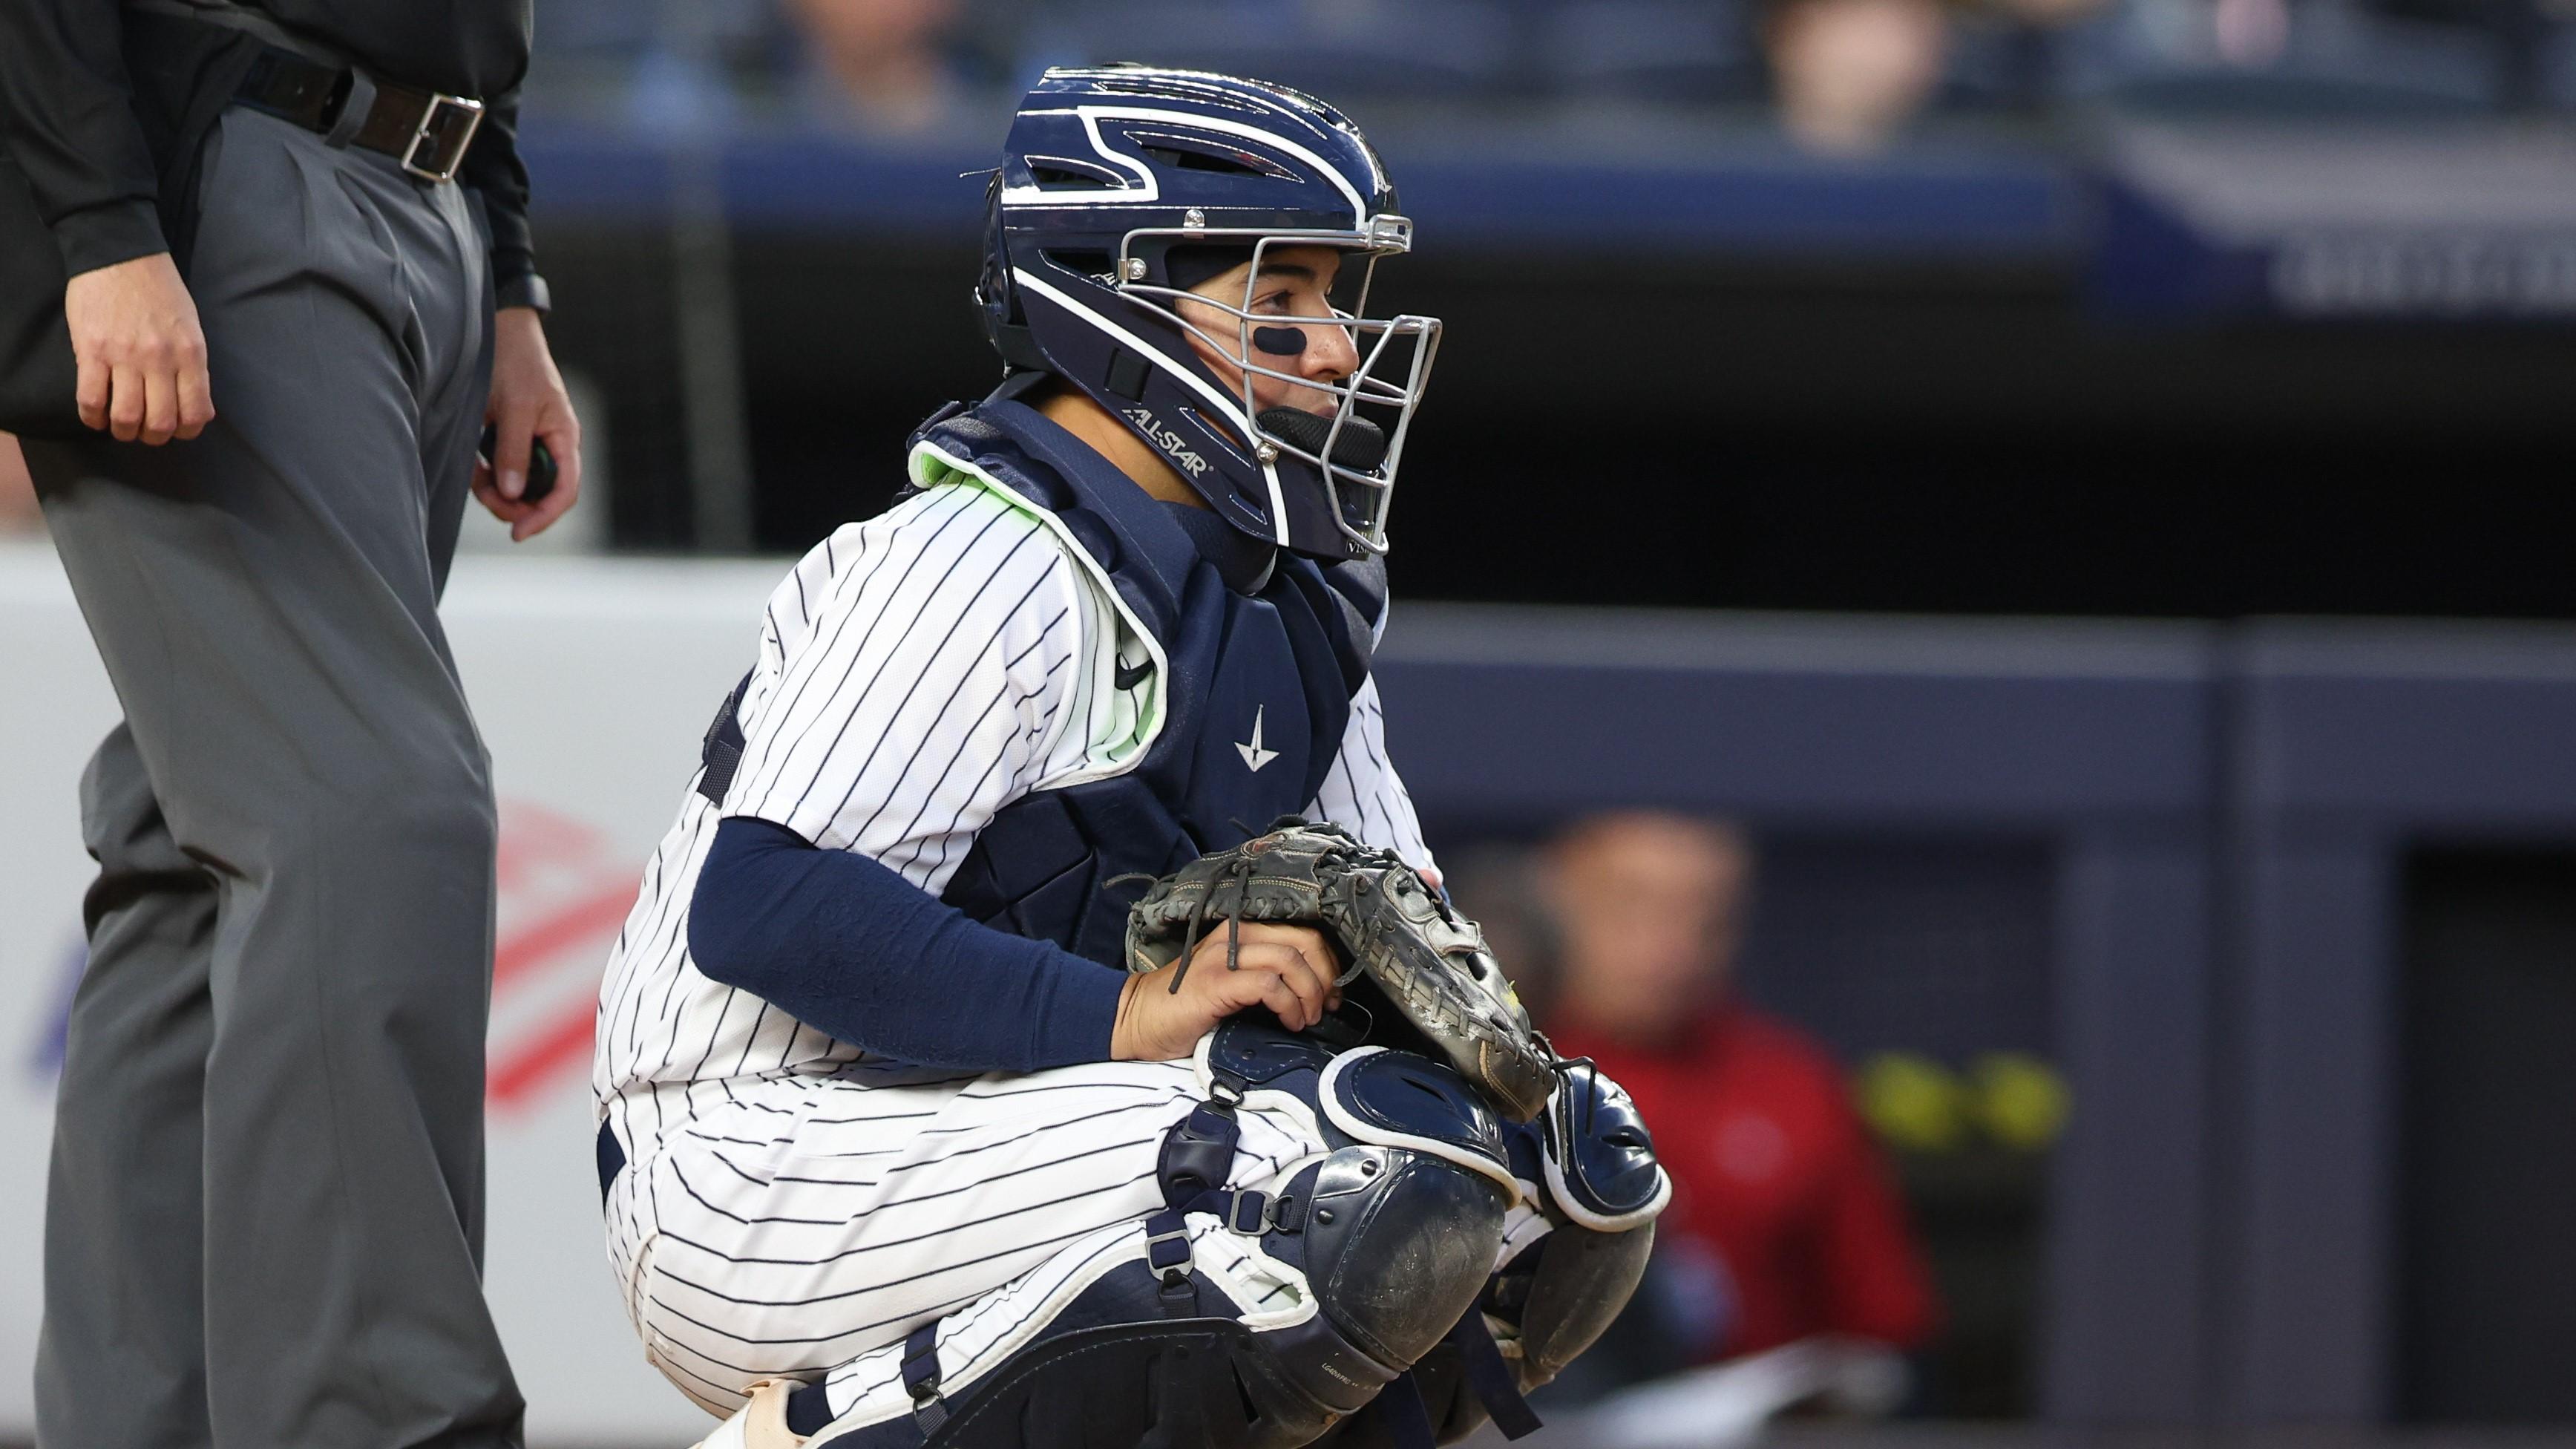 Apr 22, 2022; Bronx, New York, USA; New York Yankees catcher Jose Trevino (39) uses an electronic device to signal a pitch during the second inning against the Cleveland Guardians at Yankee Stadium. Mandatory Credit: Vincent Carchietta-USA TODAY Sports / Vincent Carchietta-USA TODAY Sports